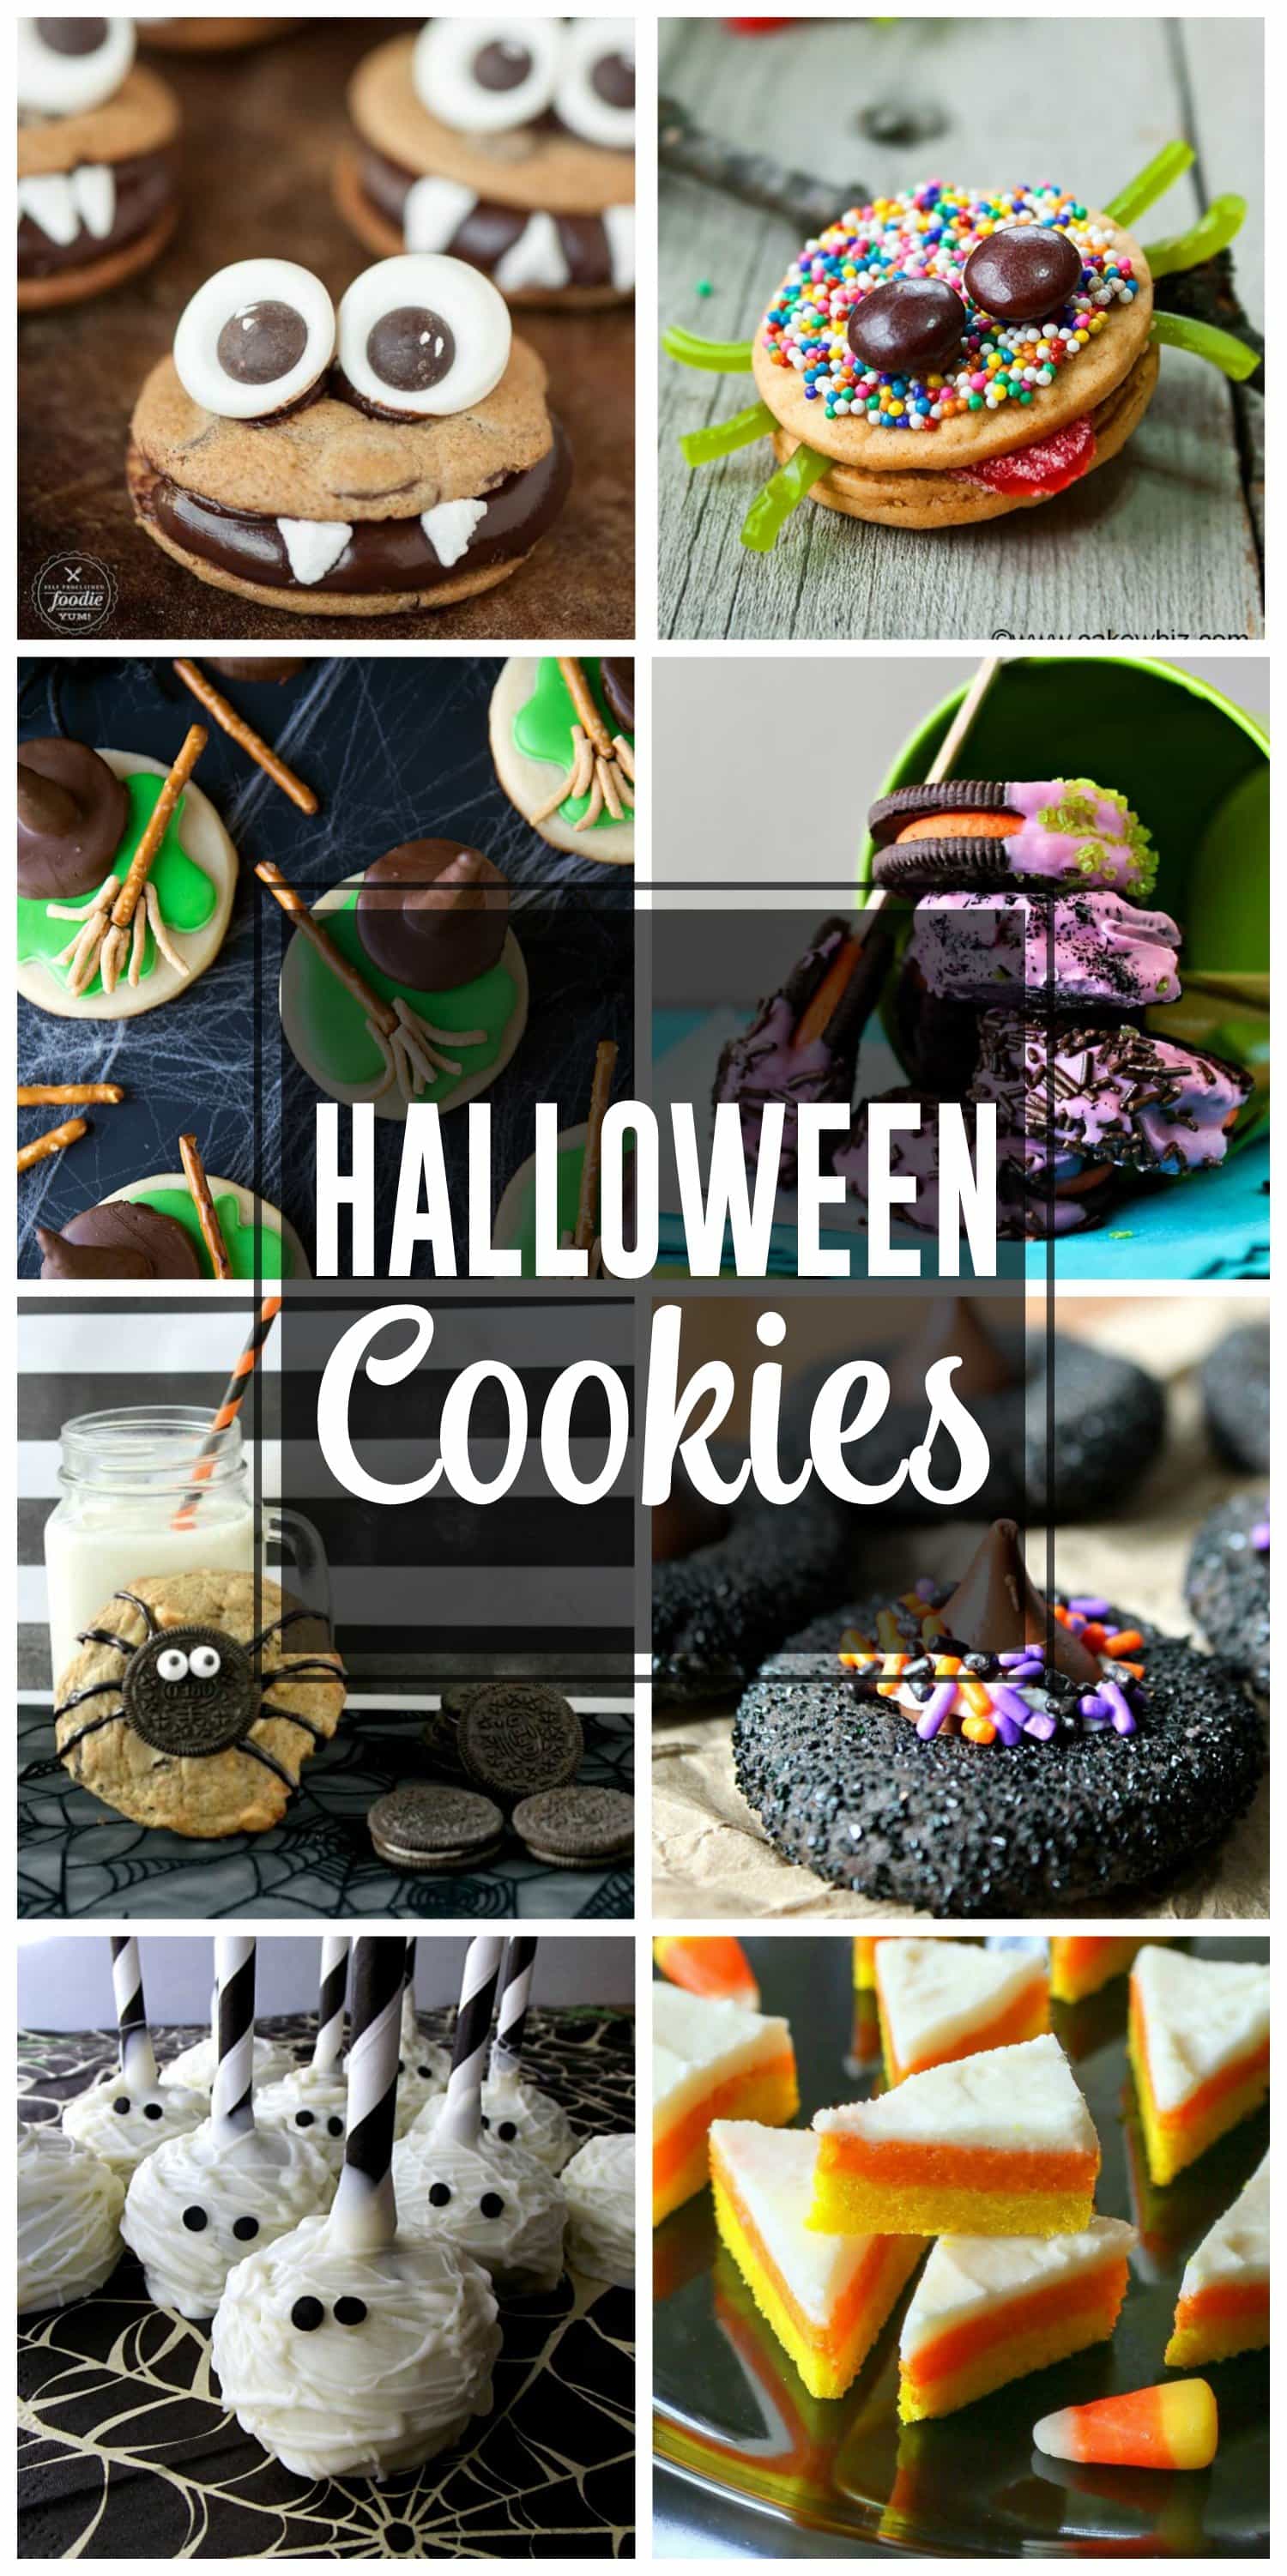 Fun Halloween Cookies that your kids will love for you to make. Oreos, candy corn cookies, sugar cookies